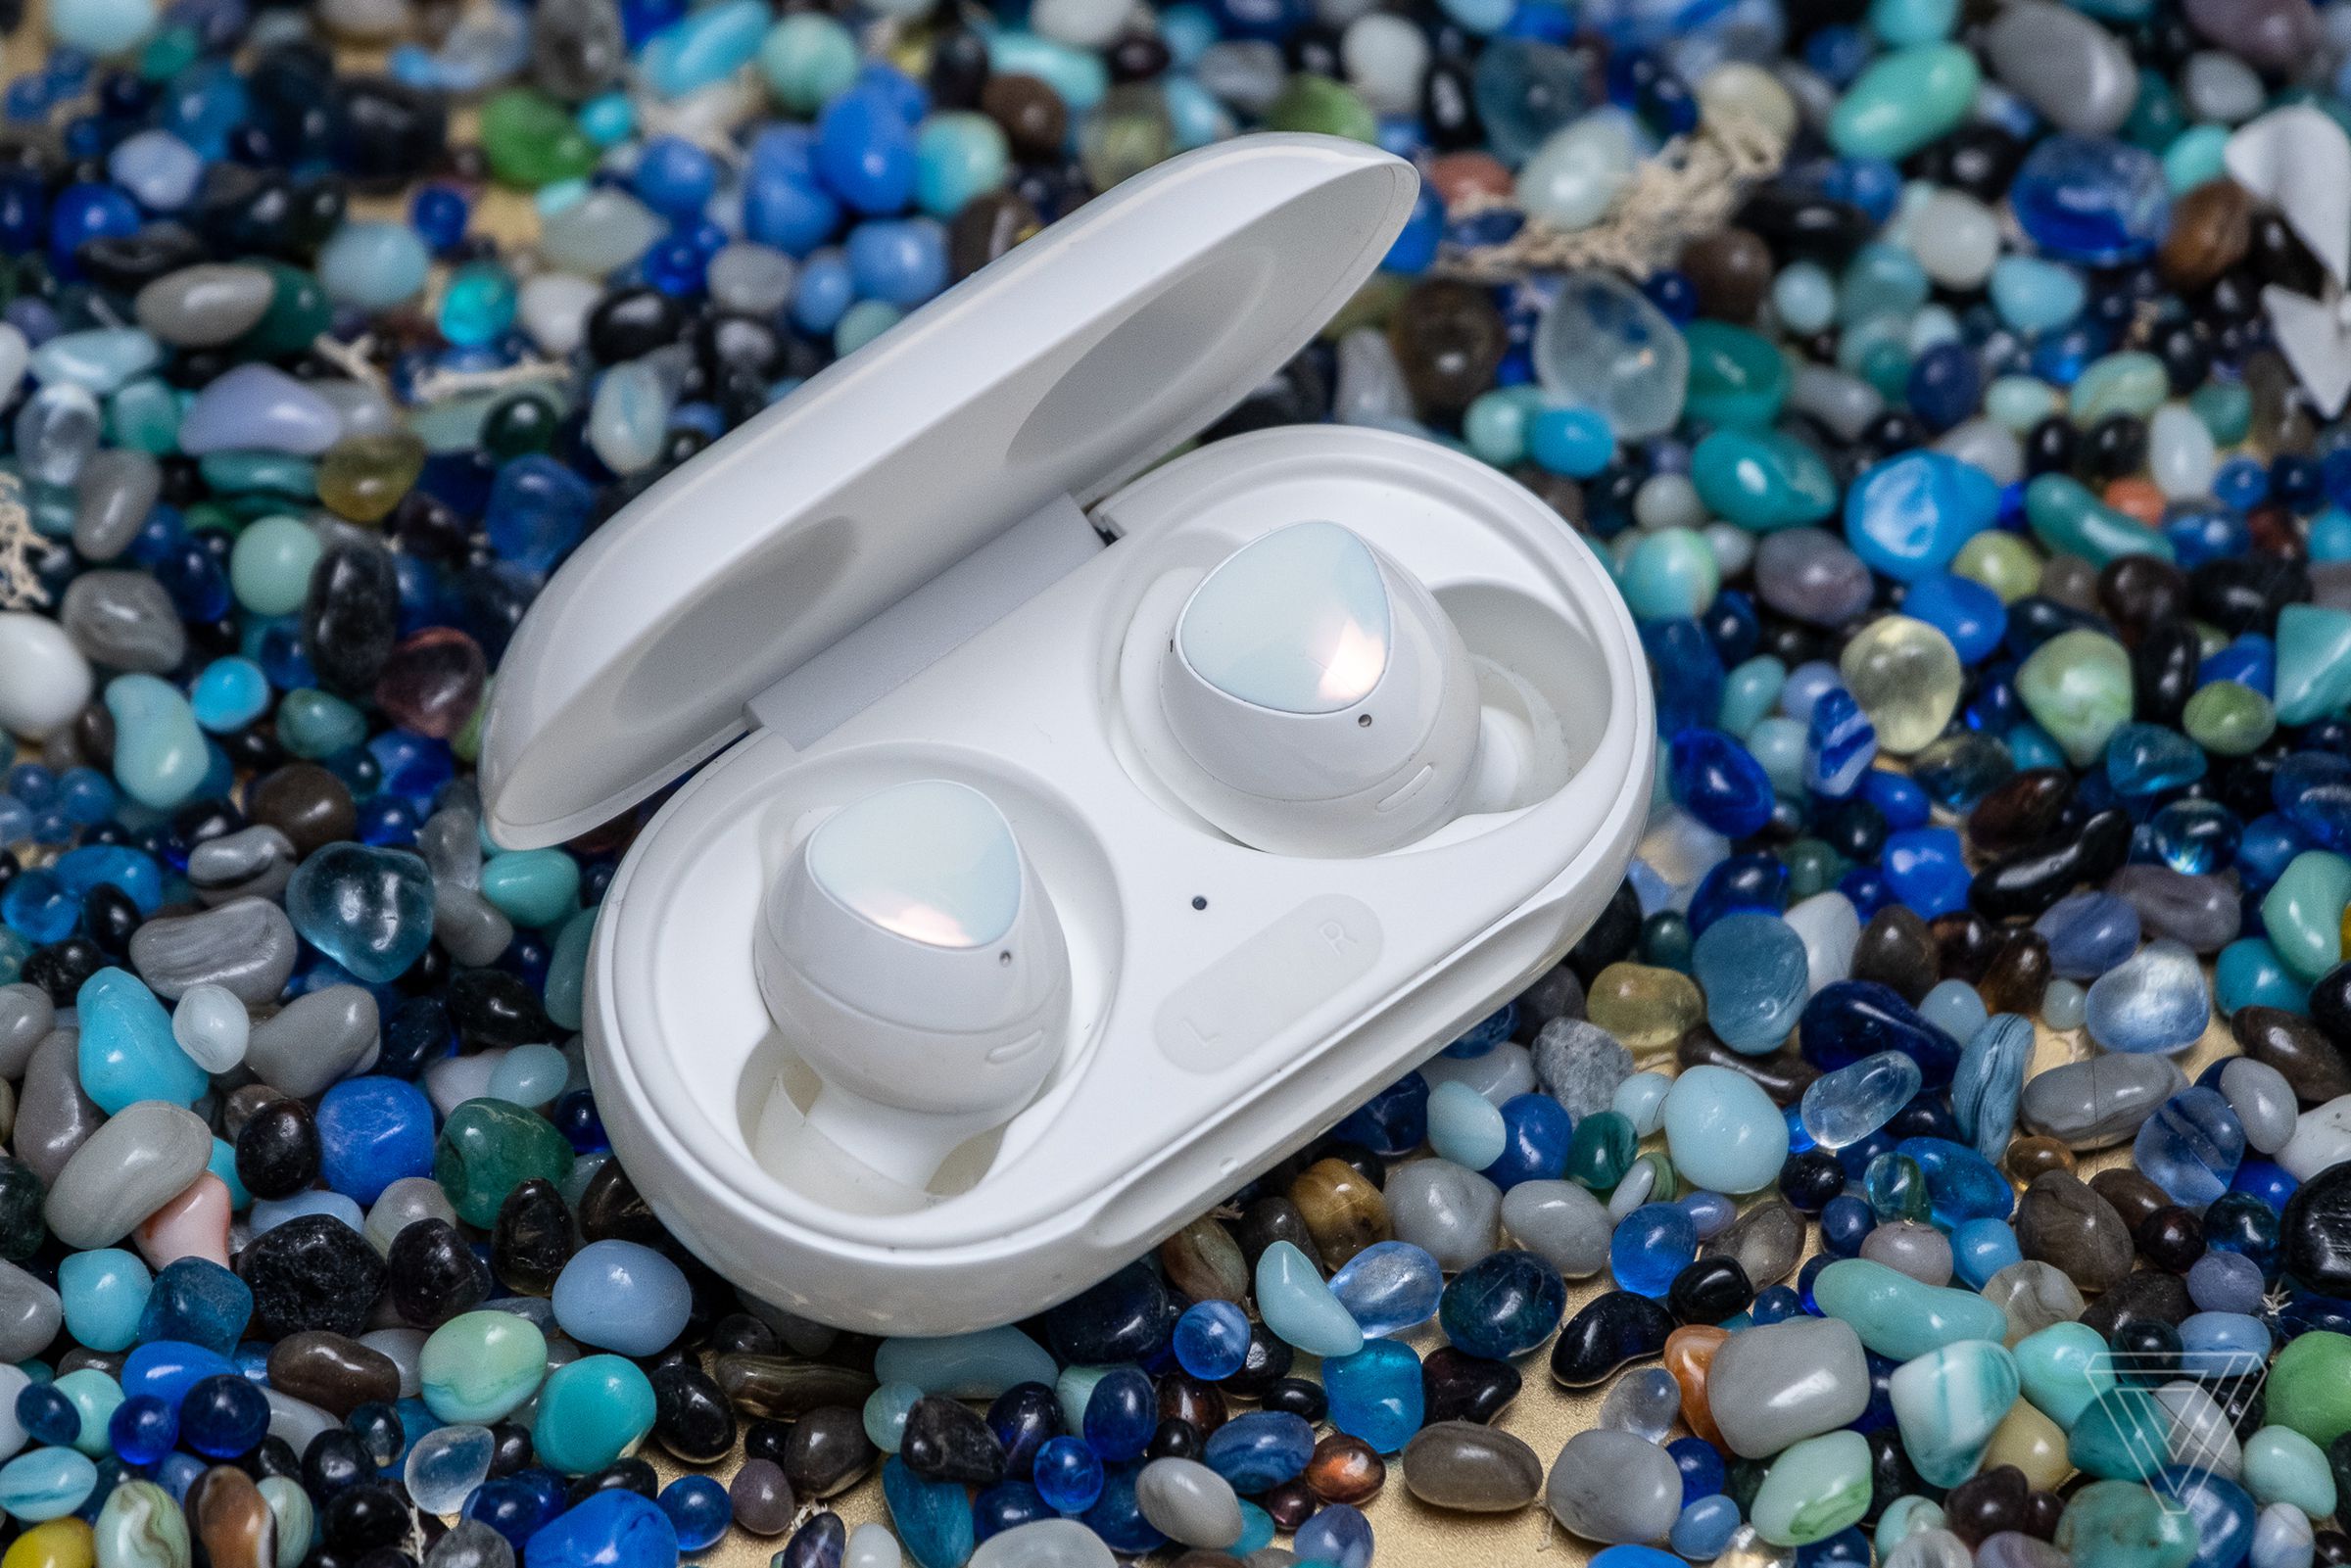 The Galaxy Buds Plus’ case.